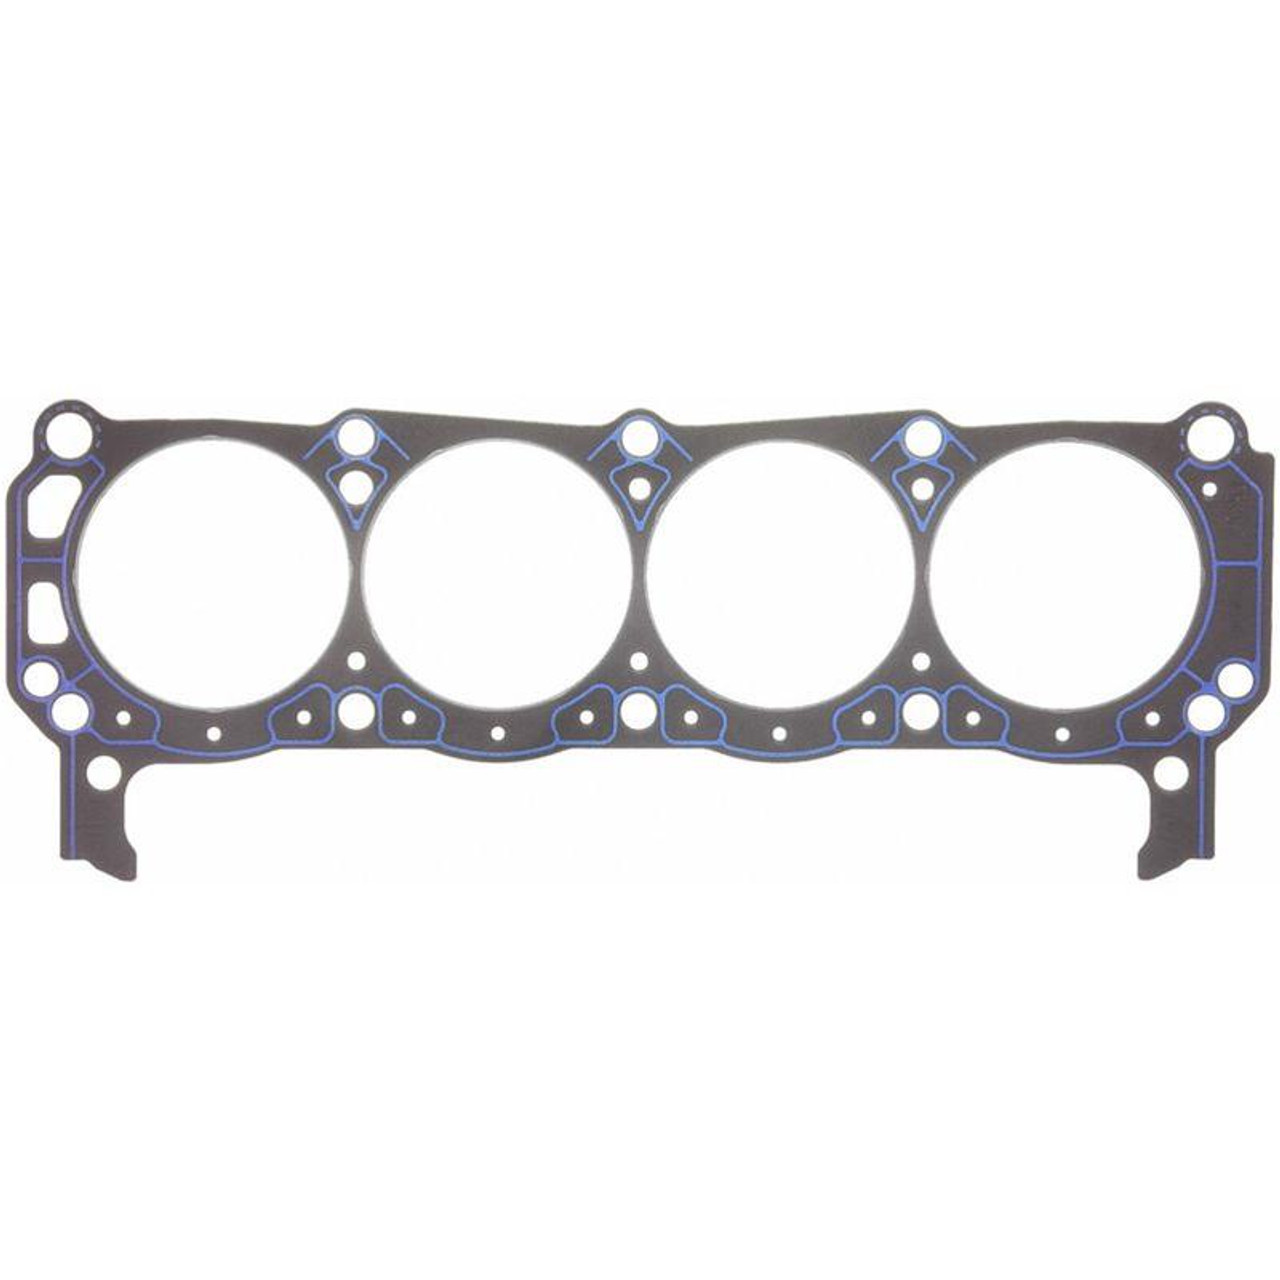 FelPro 1011-1 Head Gasket - Small Block Ford - 4.100 Bore 0.041" Thick Sold Each